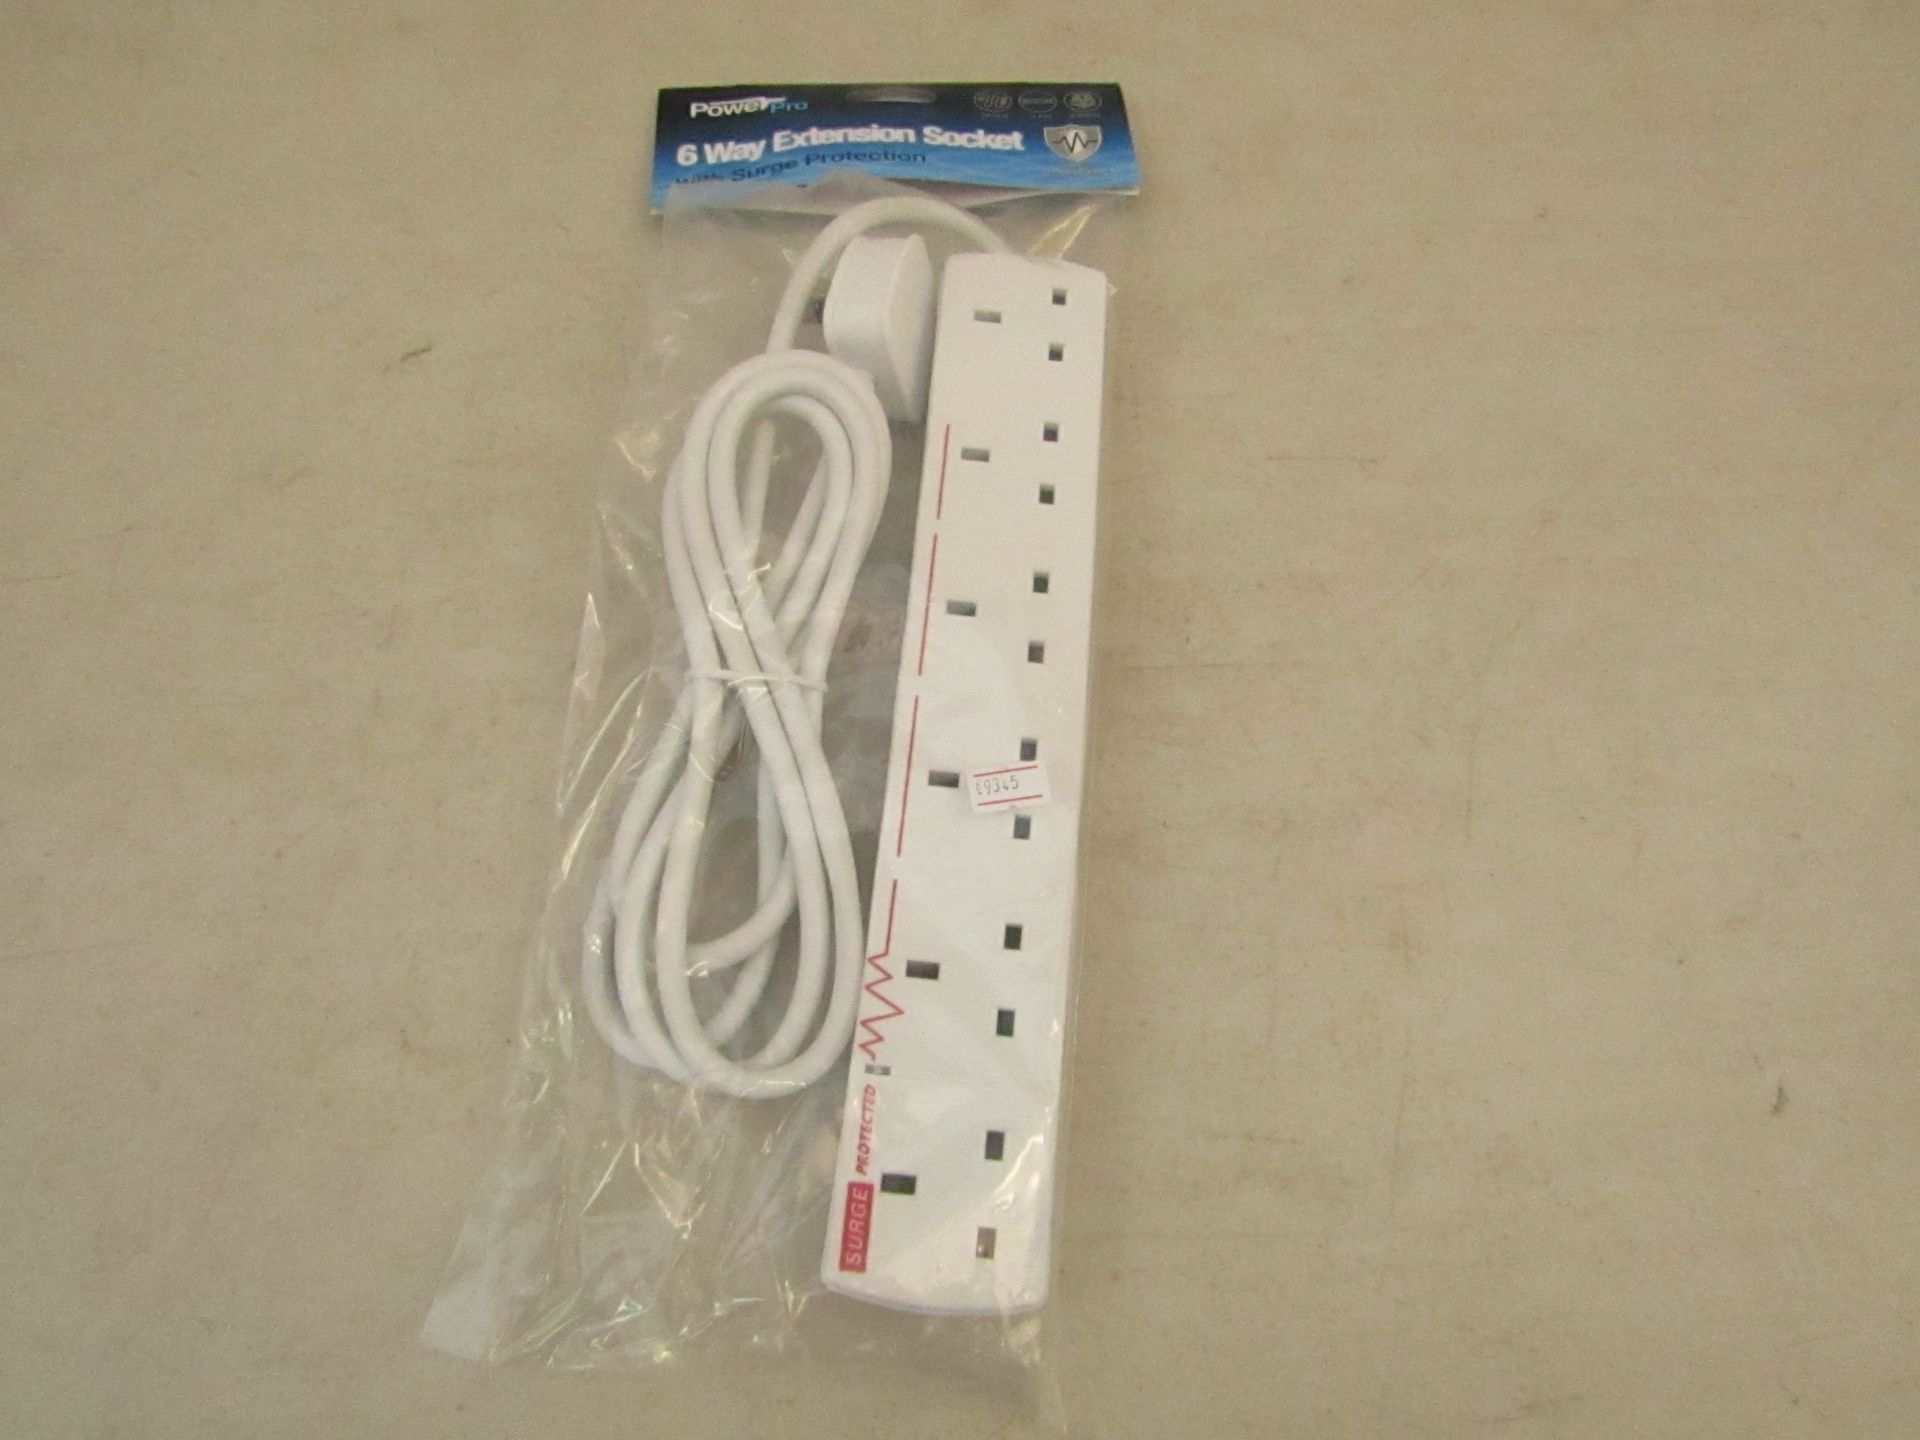 Power Pro 6 way extension socket with surge protection. New in packaging.